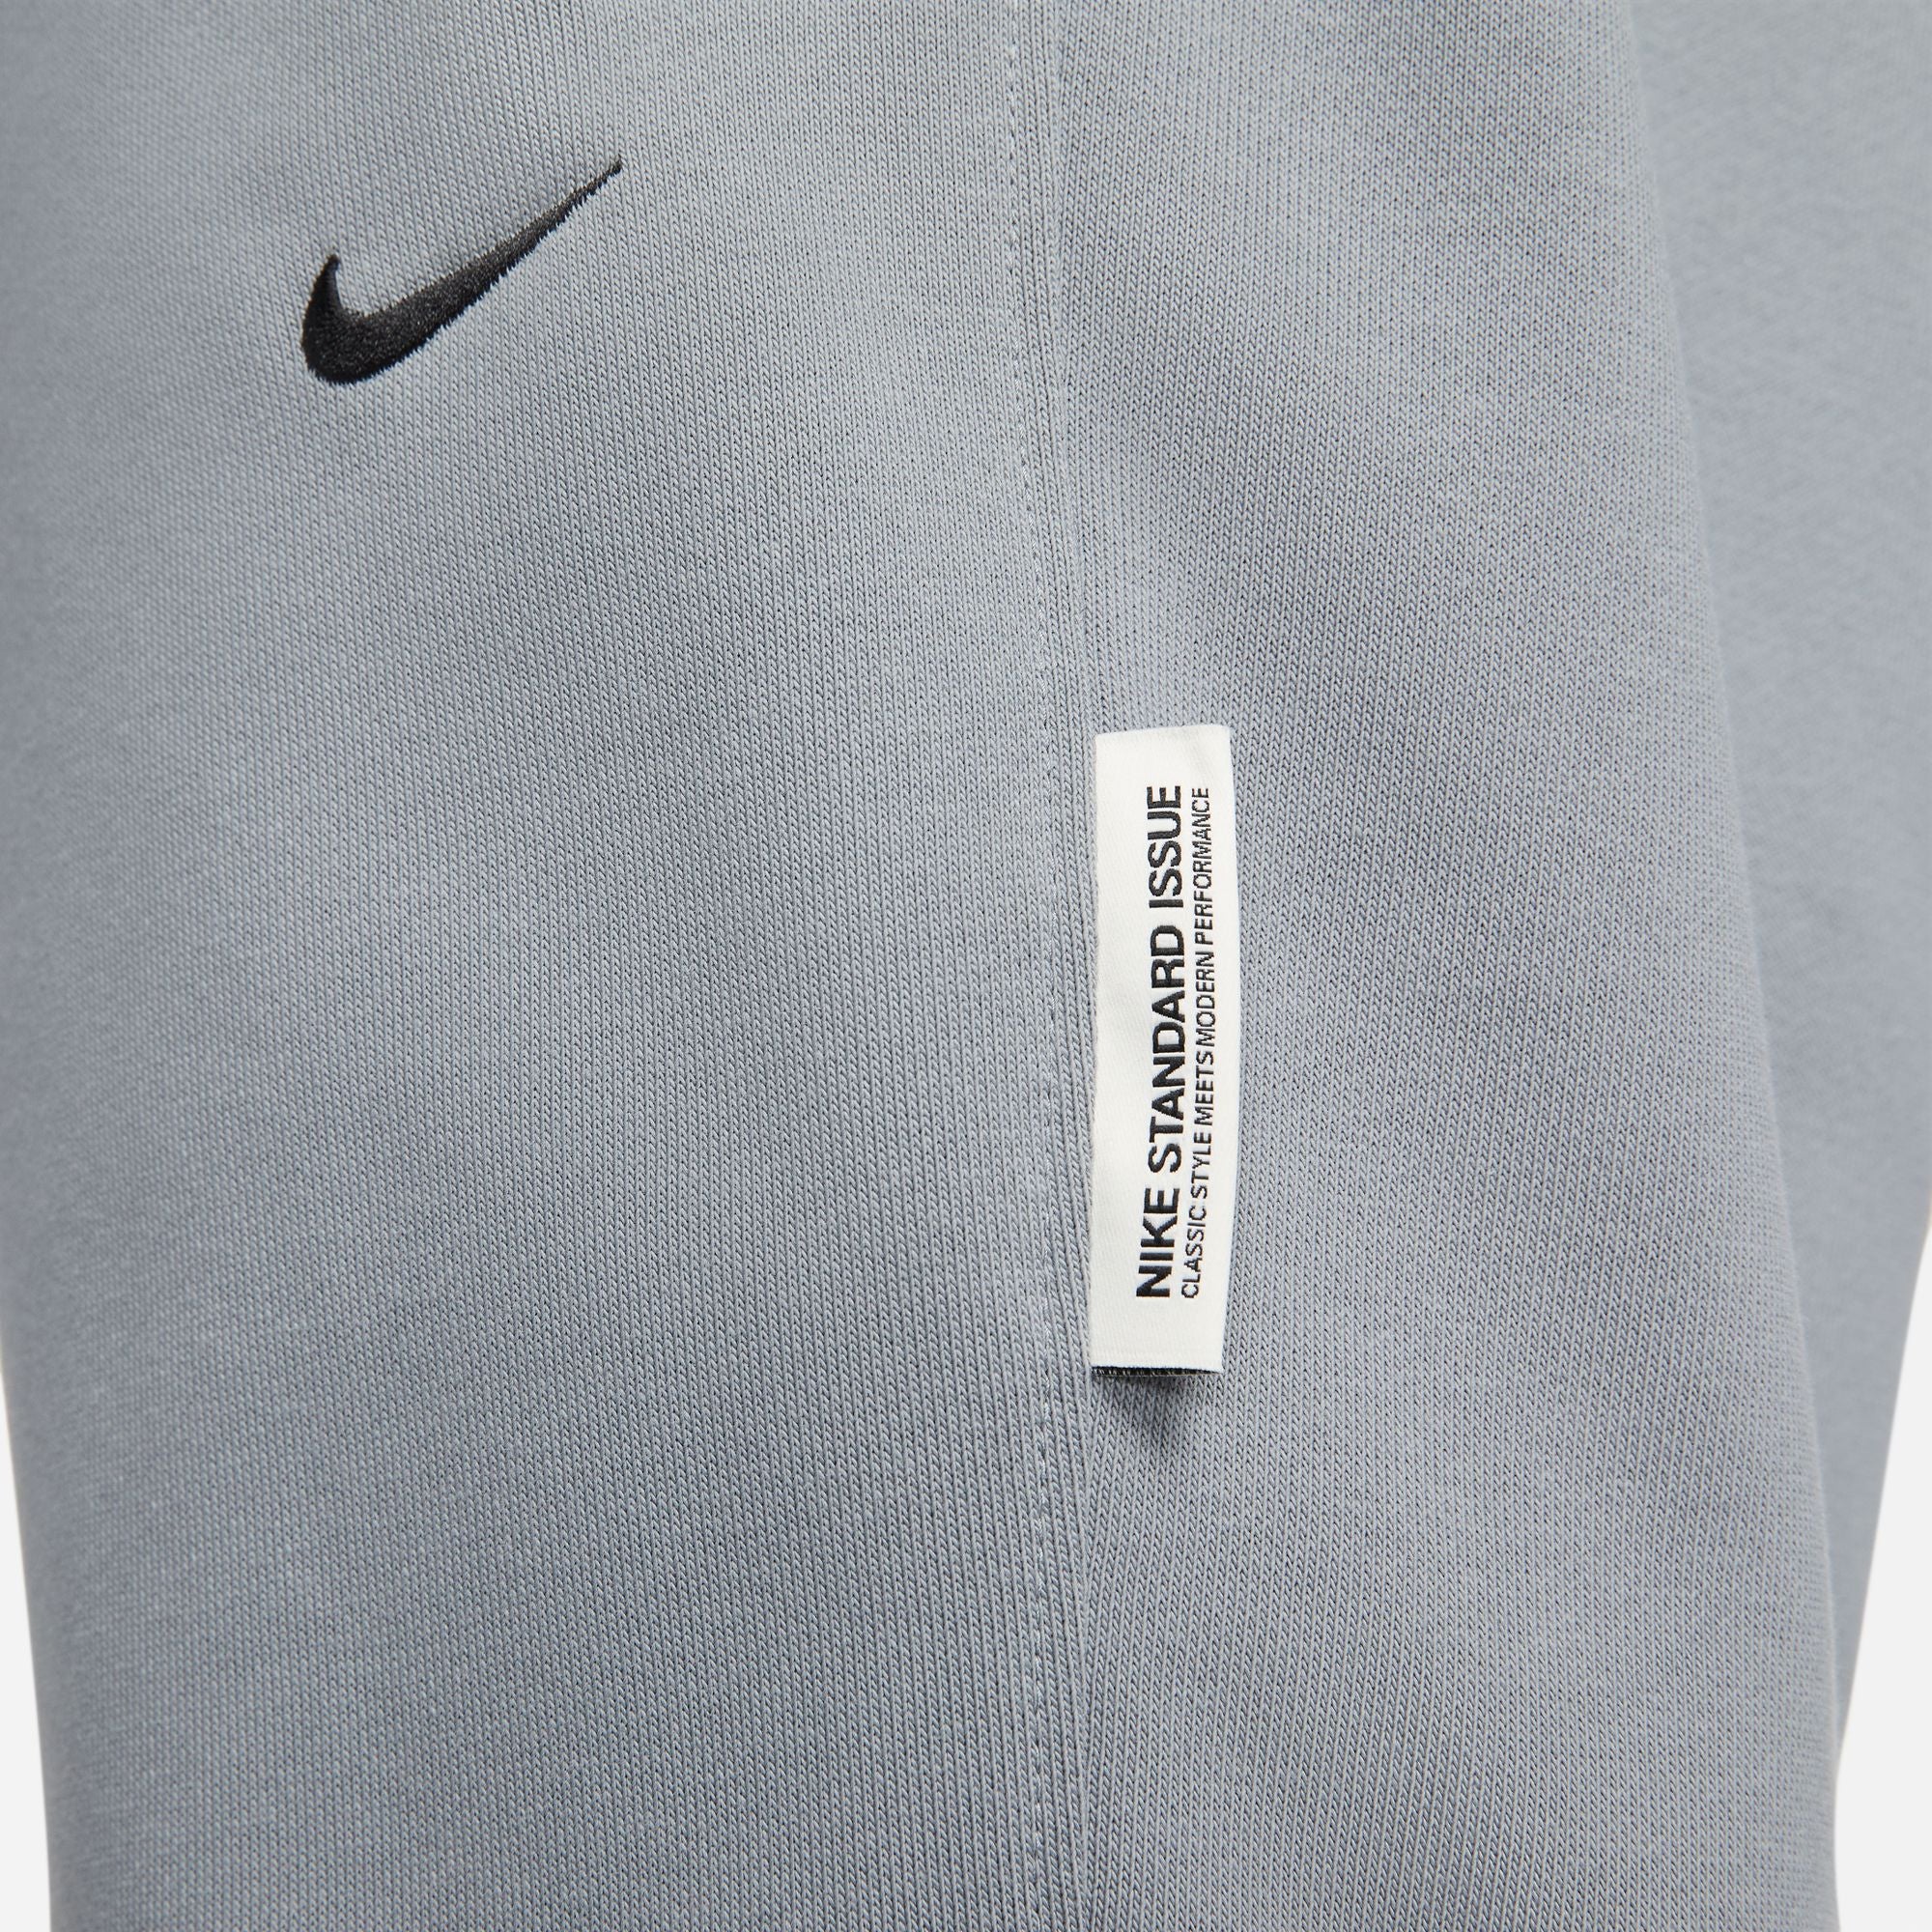 Nike Standard Issue Culture of Football Dri-FIT Jogger Pants